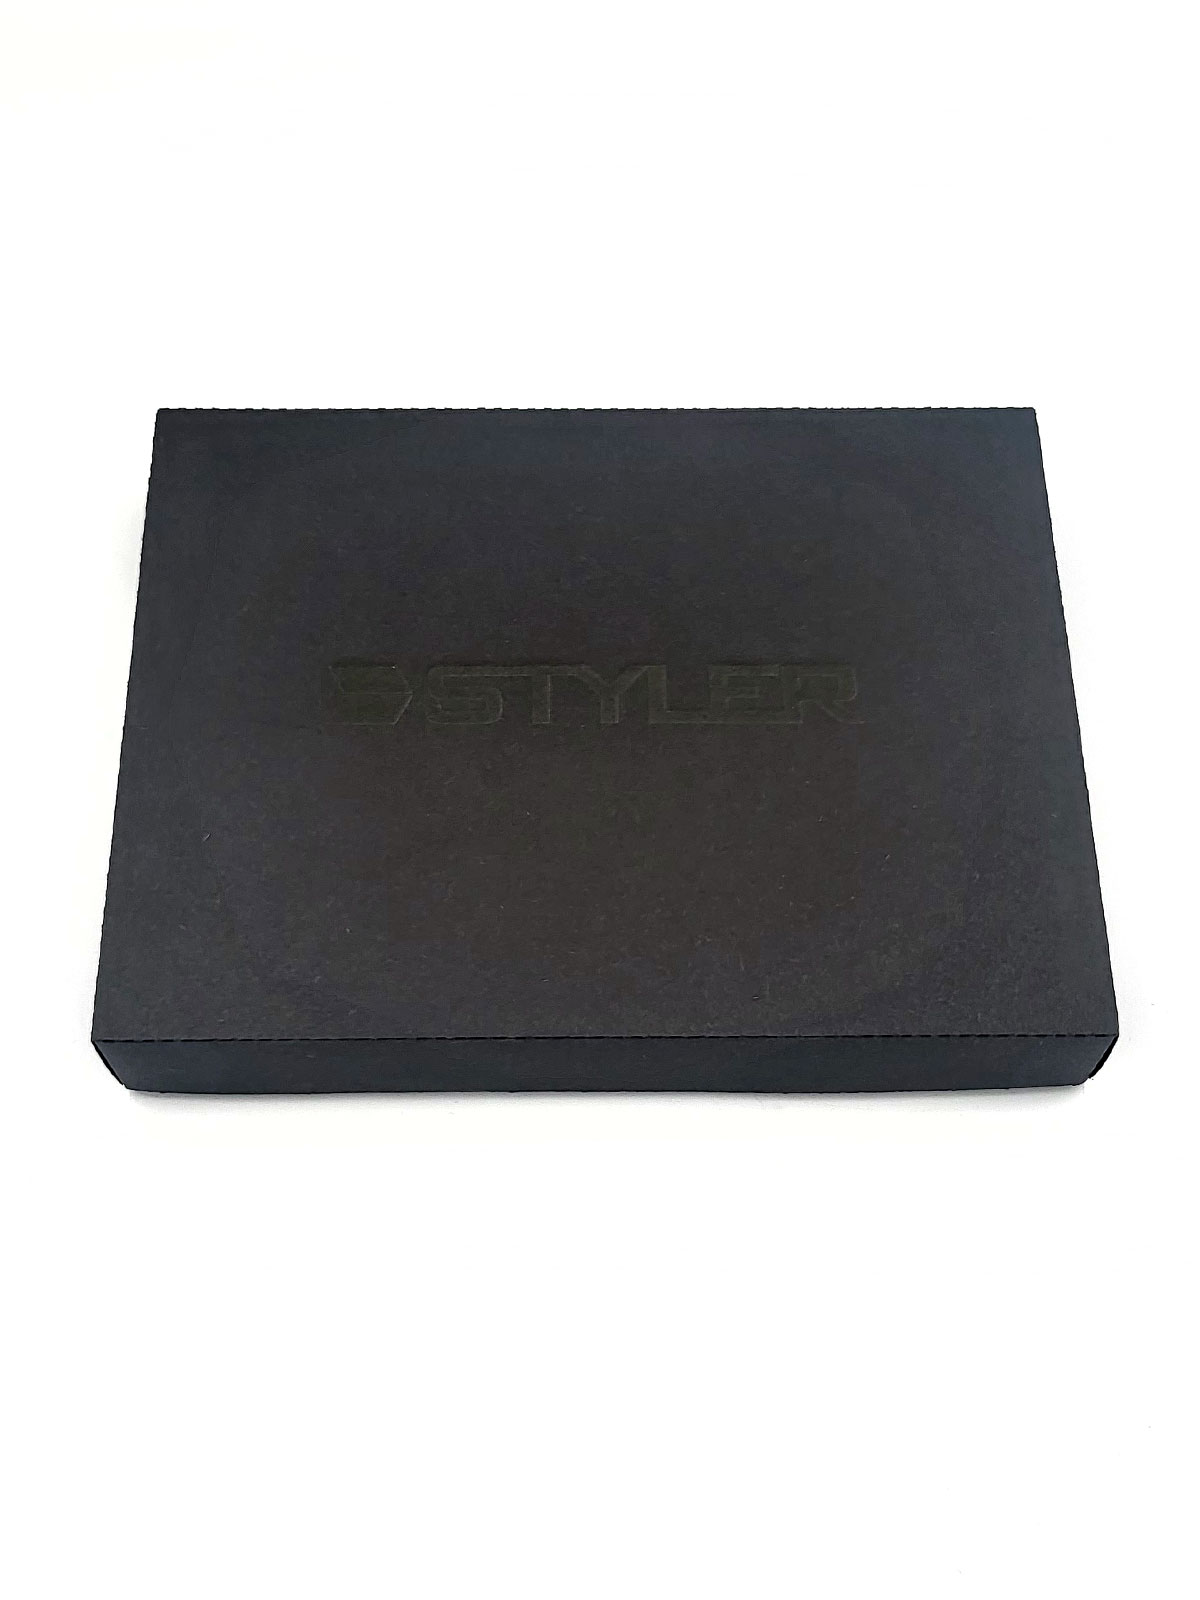 Mens wallet with two compartments - 10852 - € 38.81 img4